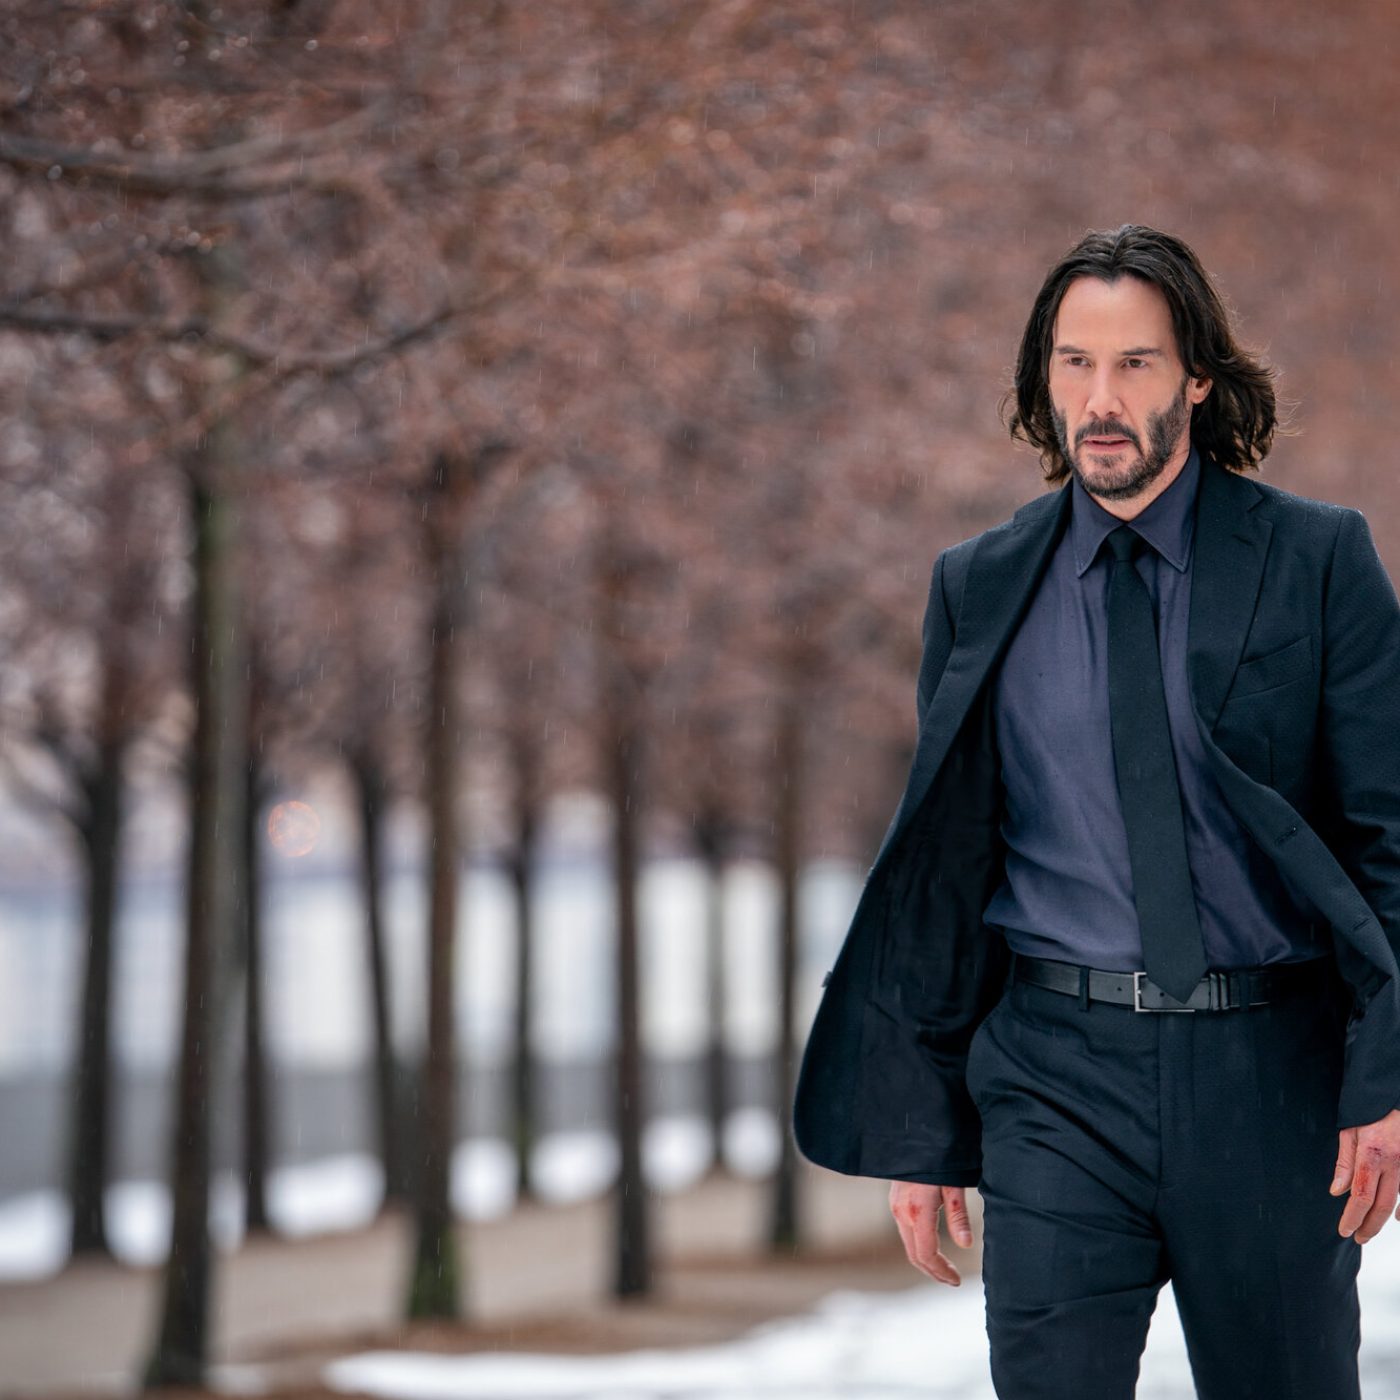 Final trailer for 'John Wick: Chapter 4' out now: Watch here - ABC